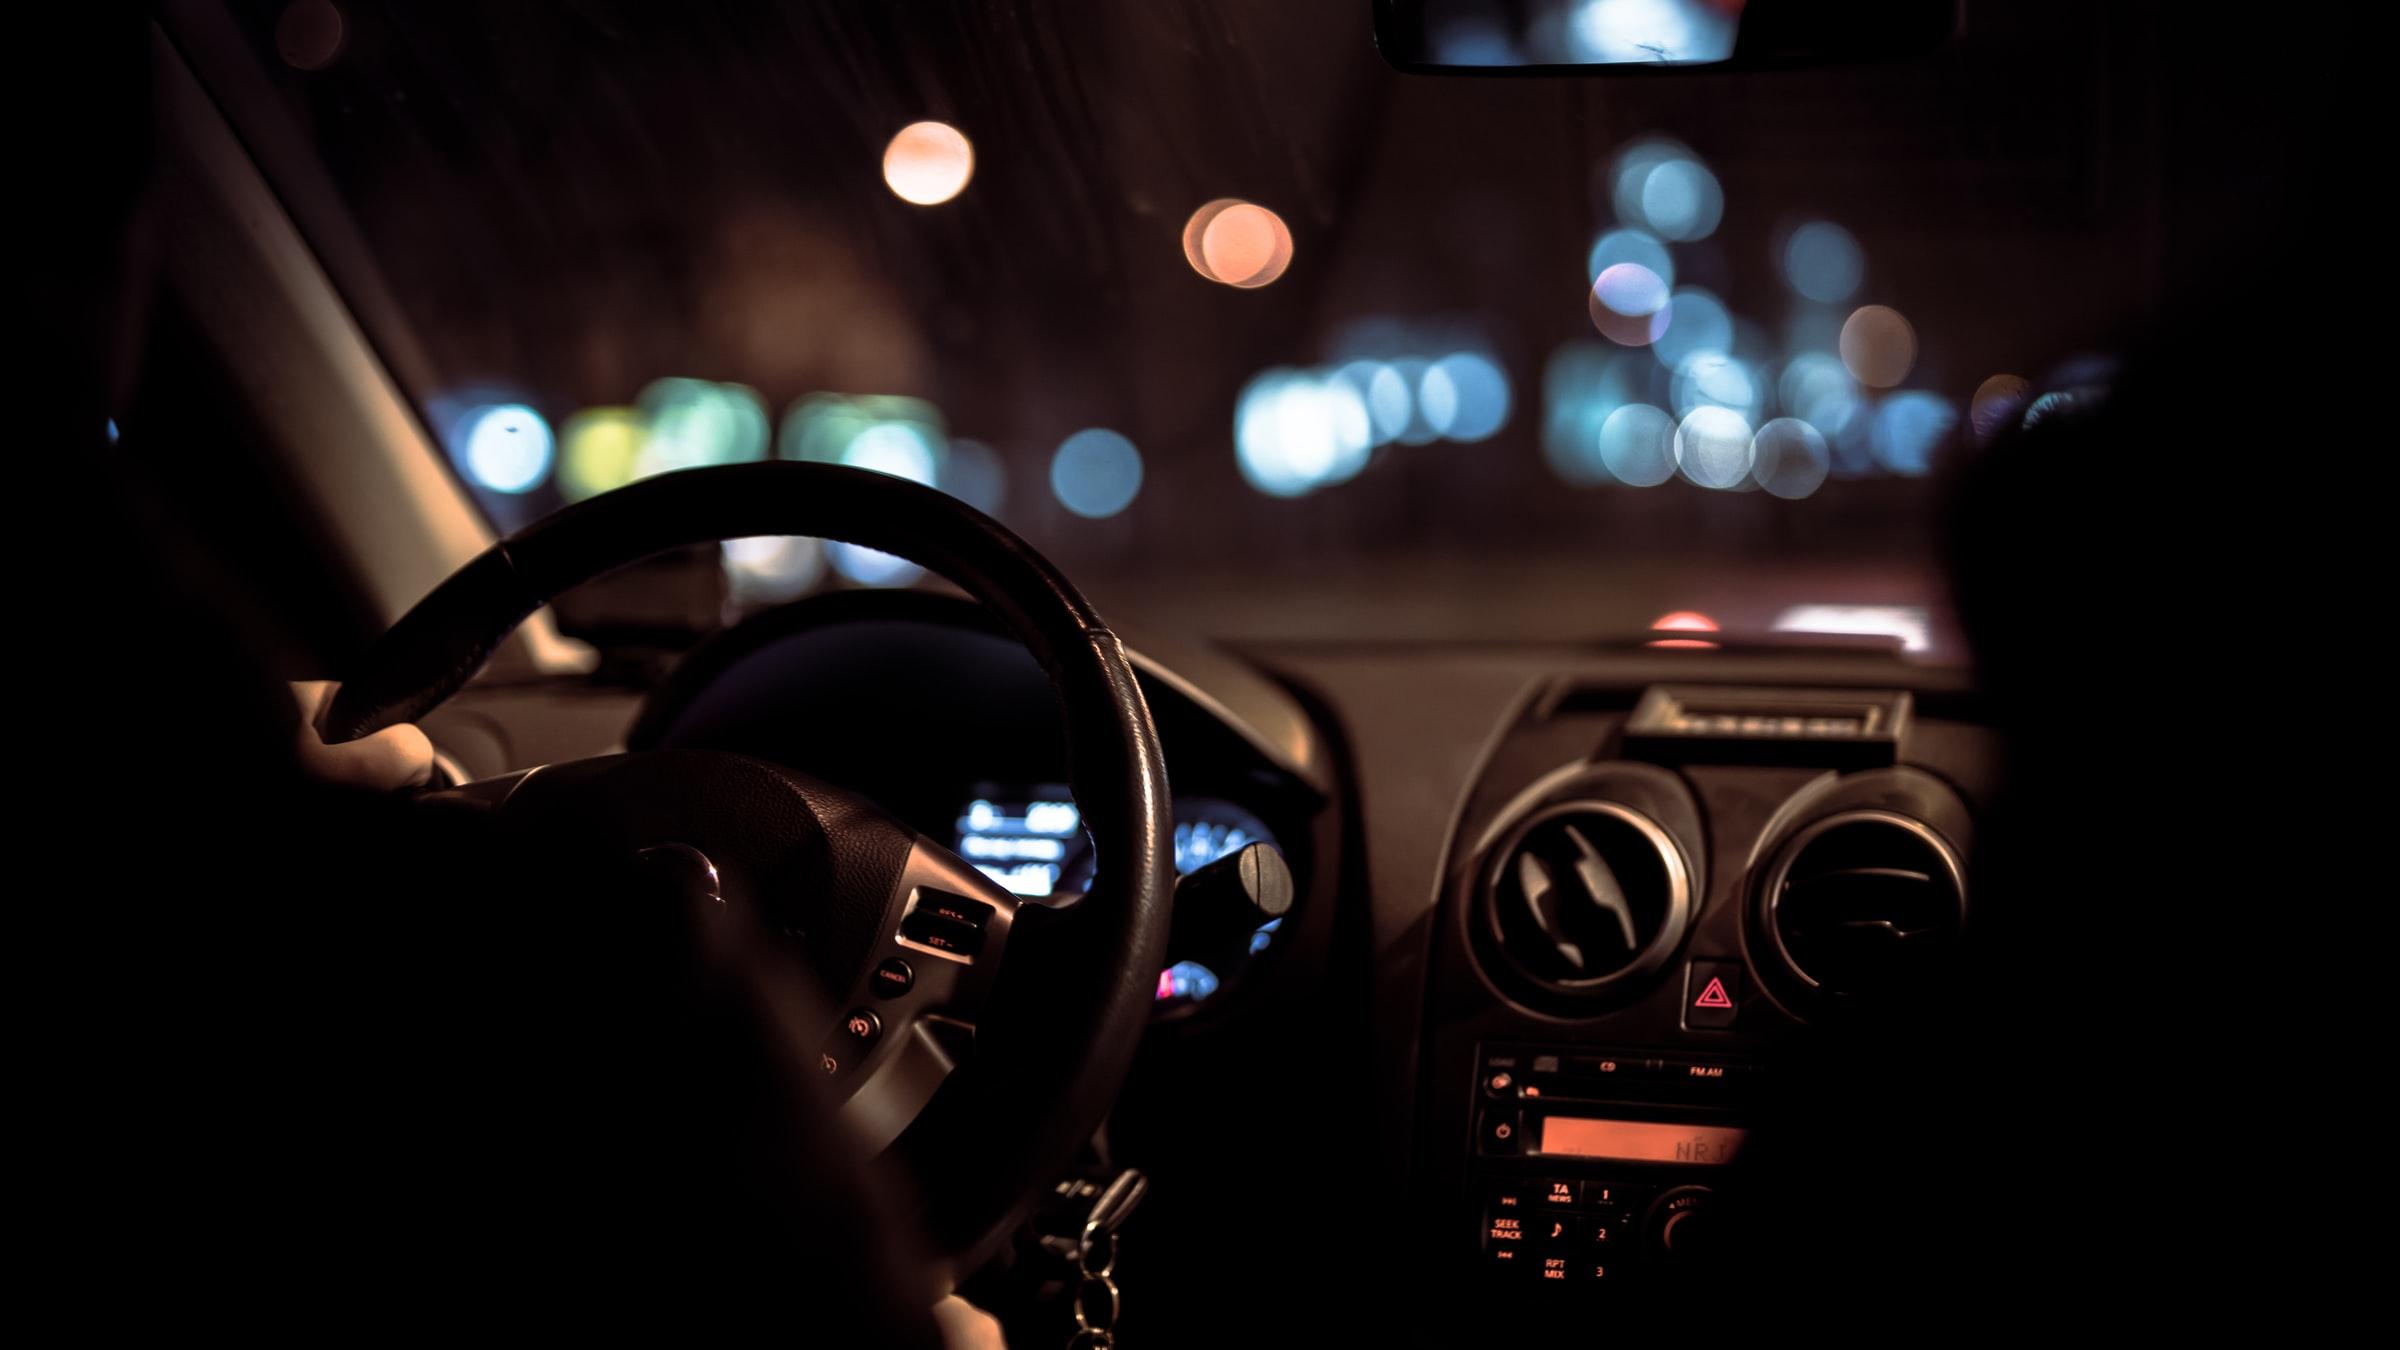 Driving at night comes with dangerous risk factors.